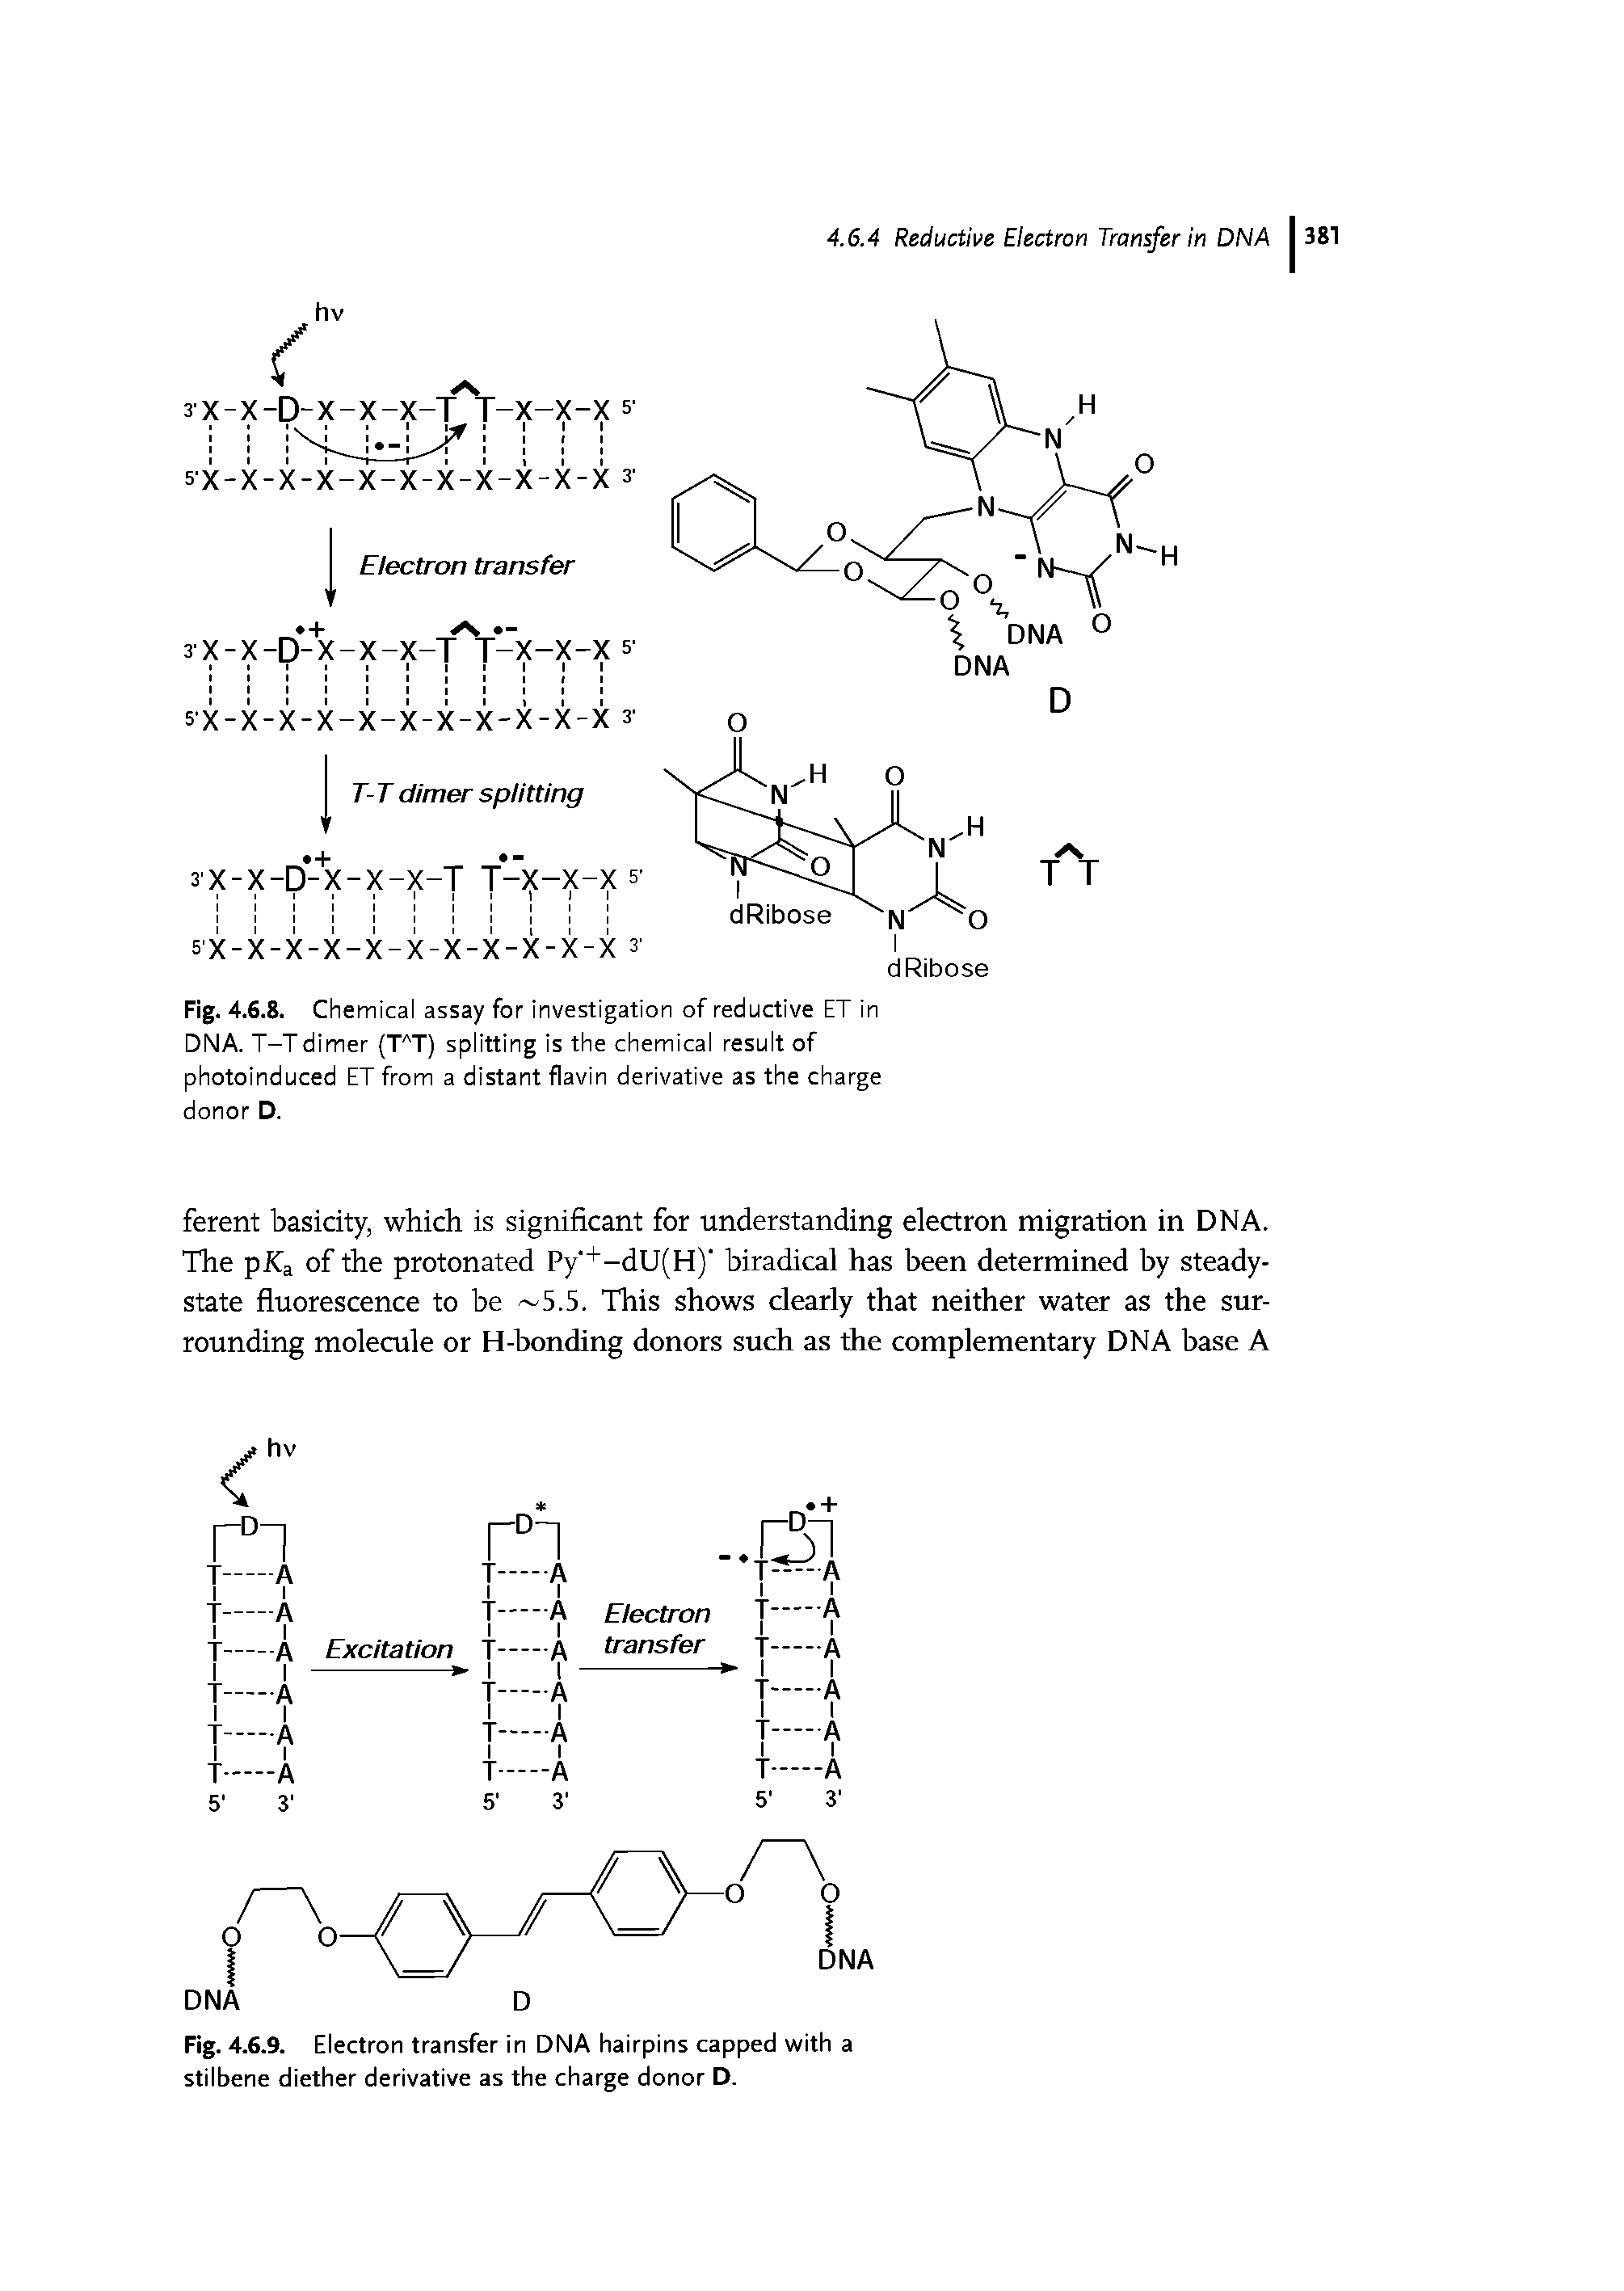 Fig. 4.6.8. Chemical assay for investigation of reductive ET in DNA. T-T dimer (TAT) splitting is the chemical result of photoinduced ET from a distant flavin derivative as the charge donor D.